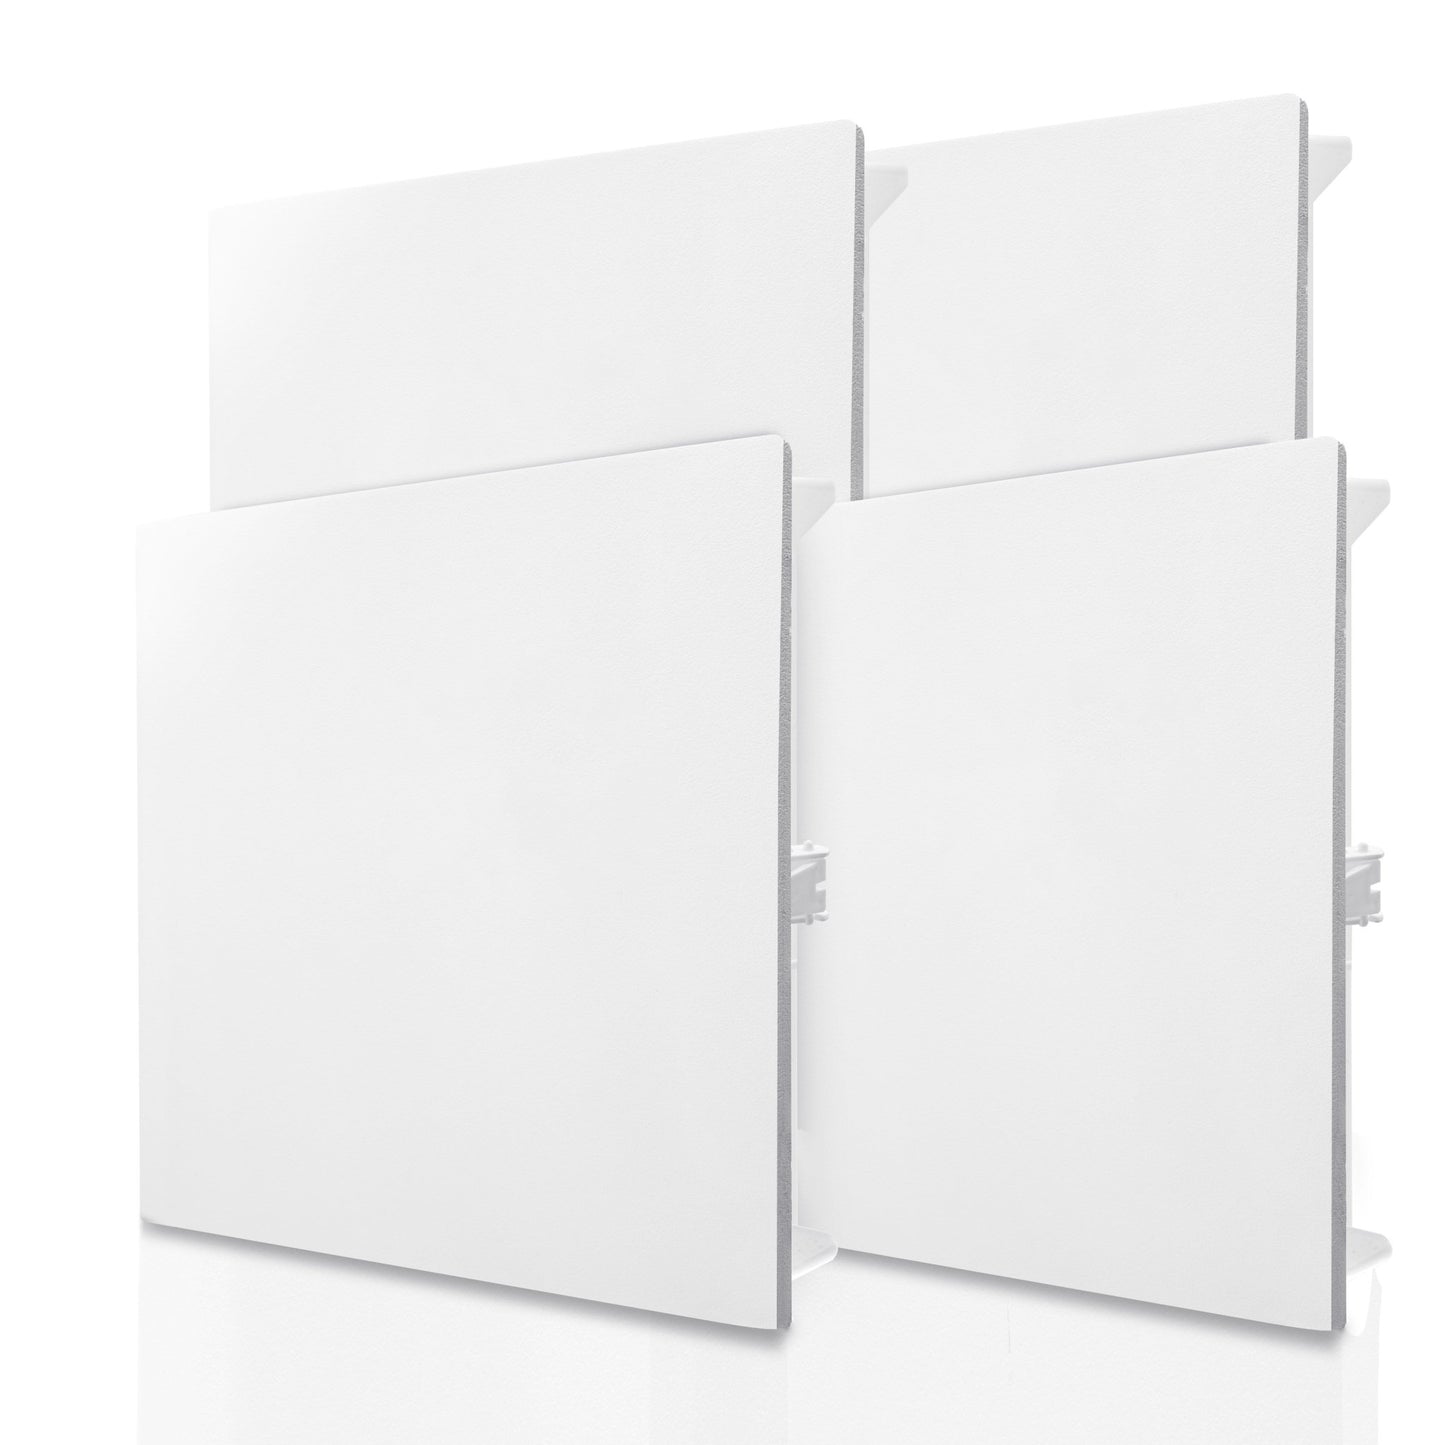 
                  
                    Morvat 12x12 Spring Access Panel for Drywall & Ceiling
                  
                